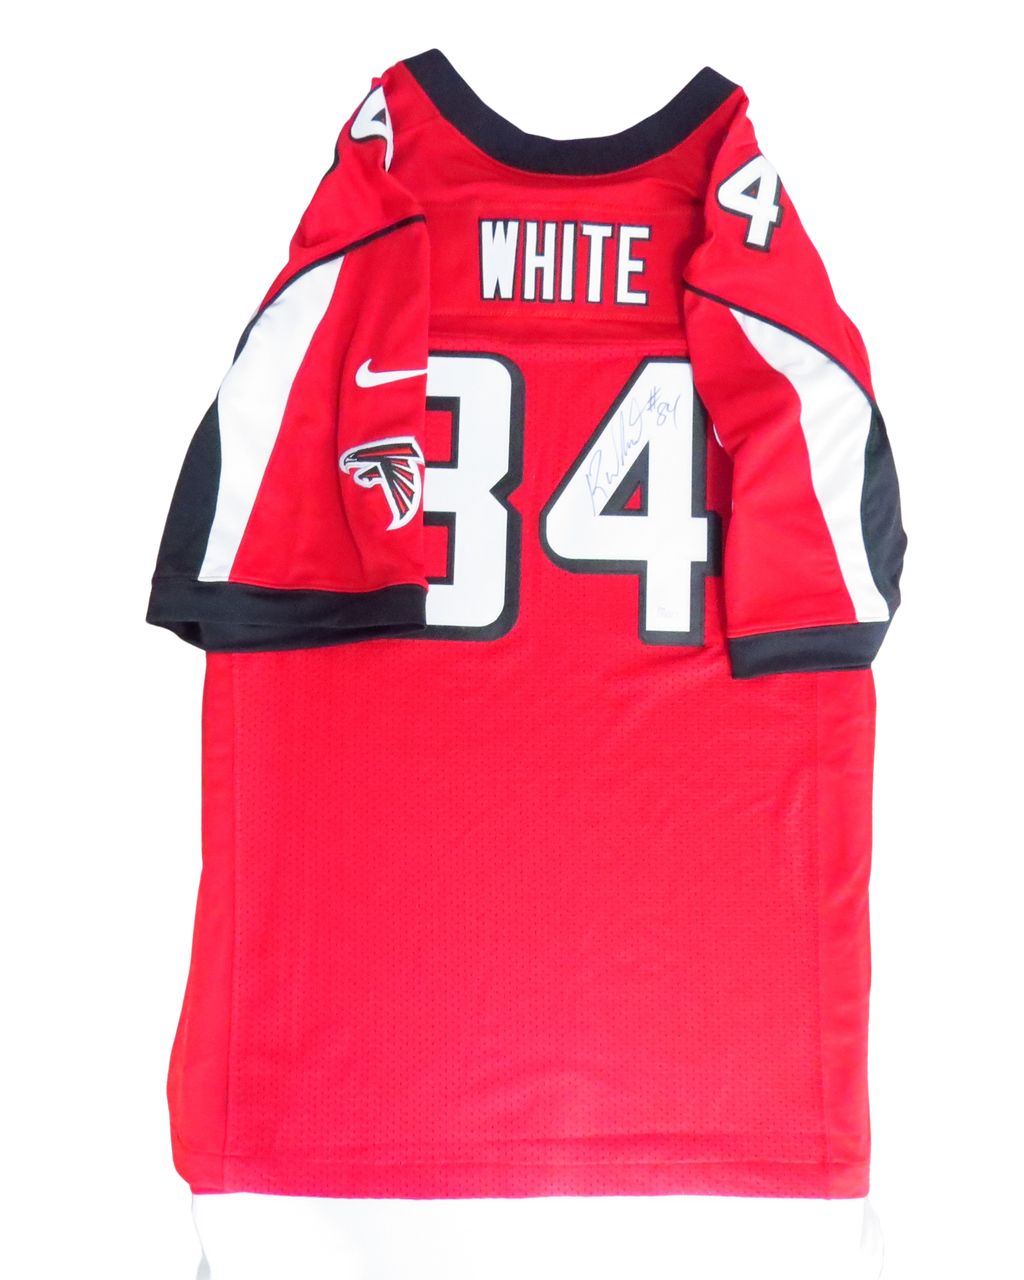 authentic falcons jersey